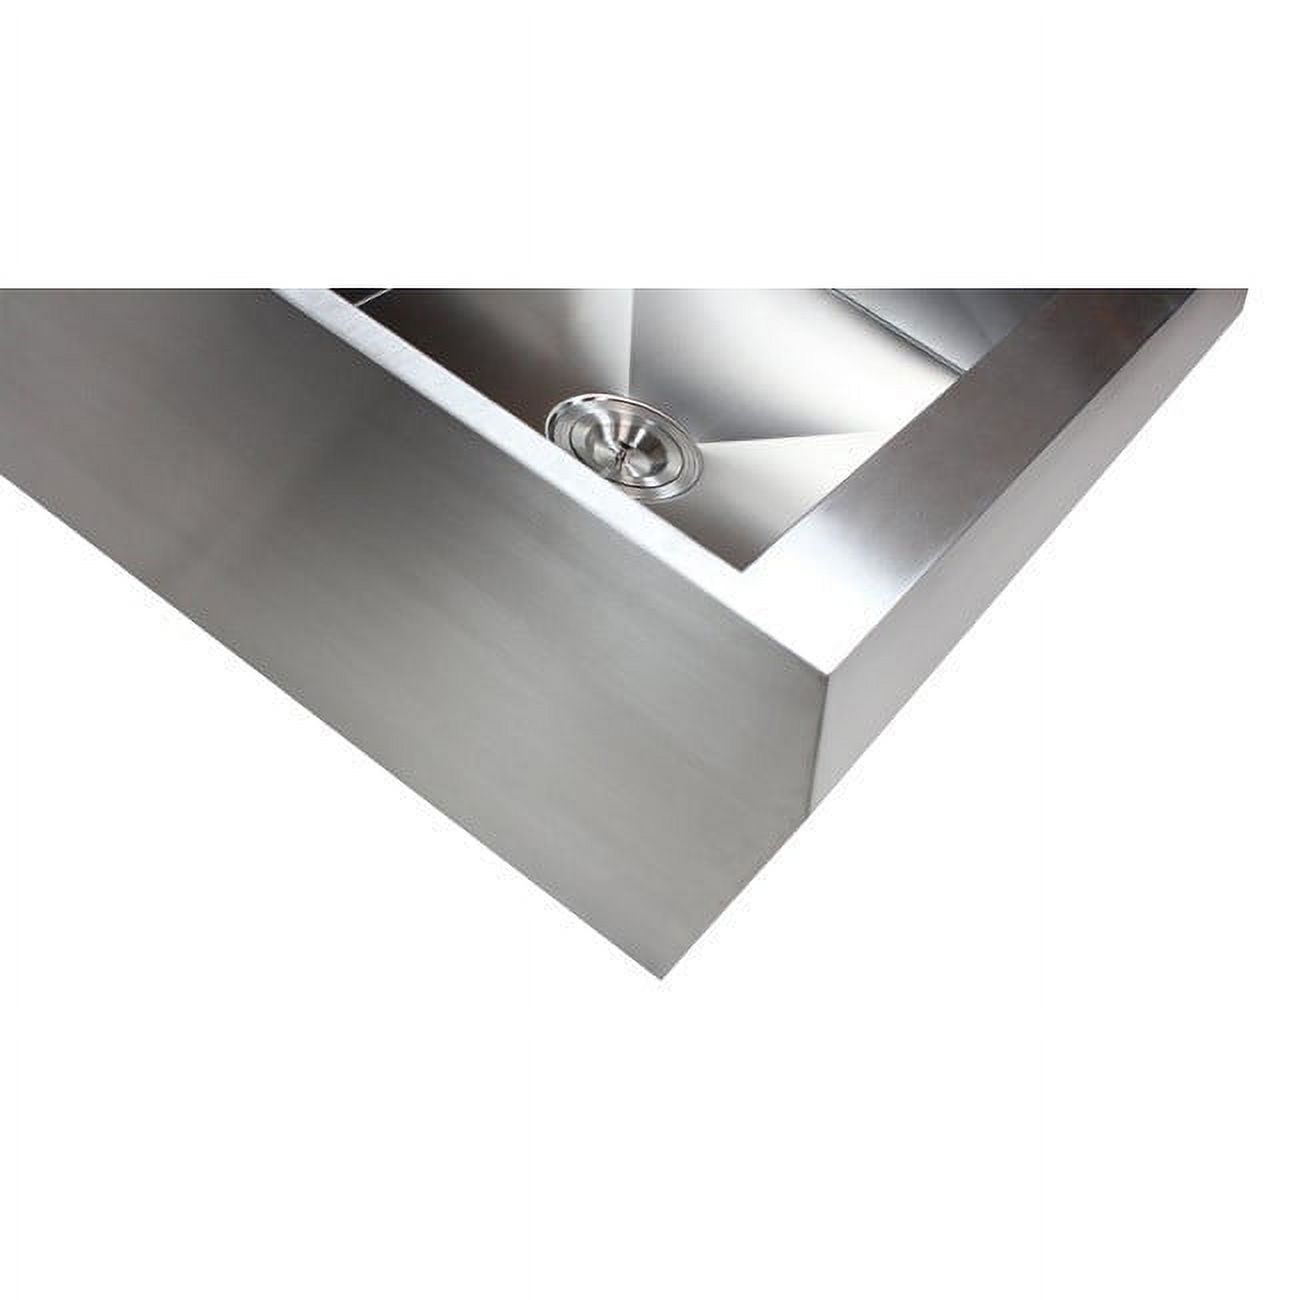 Contempo Living  33 in. Double Bowl 60 by 40 Zero Radius Well Angled Farm Apron Kitchen Sink - Stainless Steel - 16 Gauge - image 4 of 5